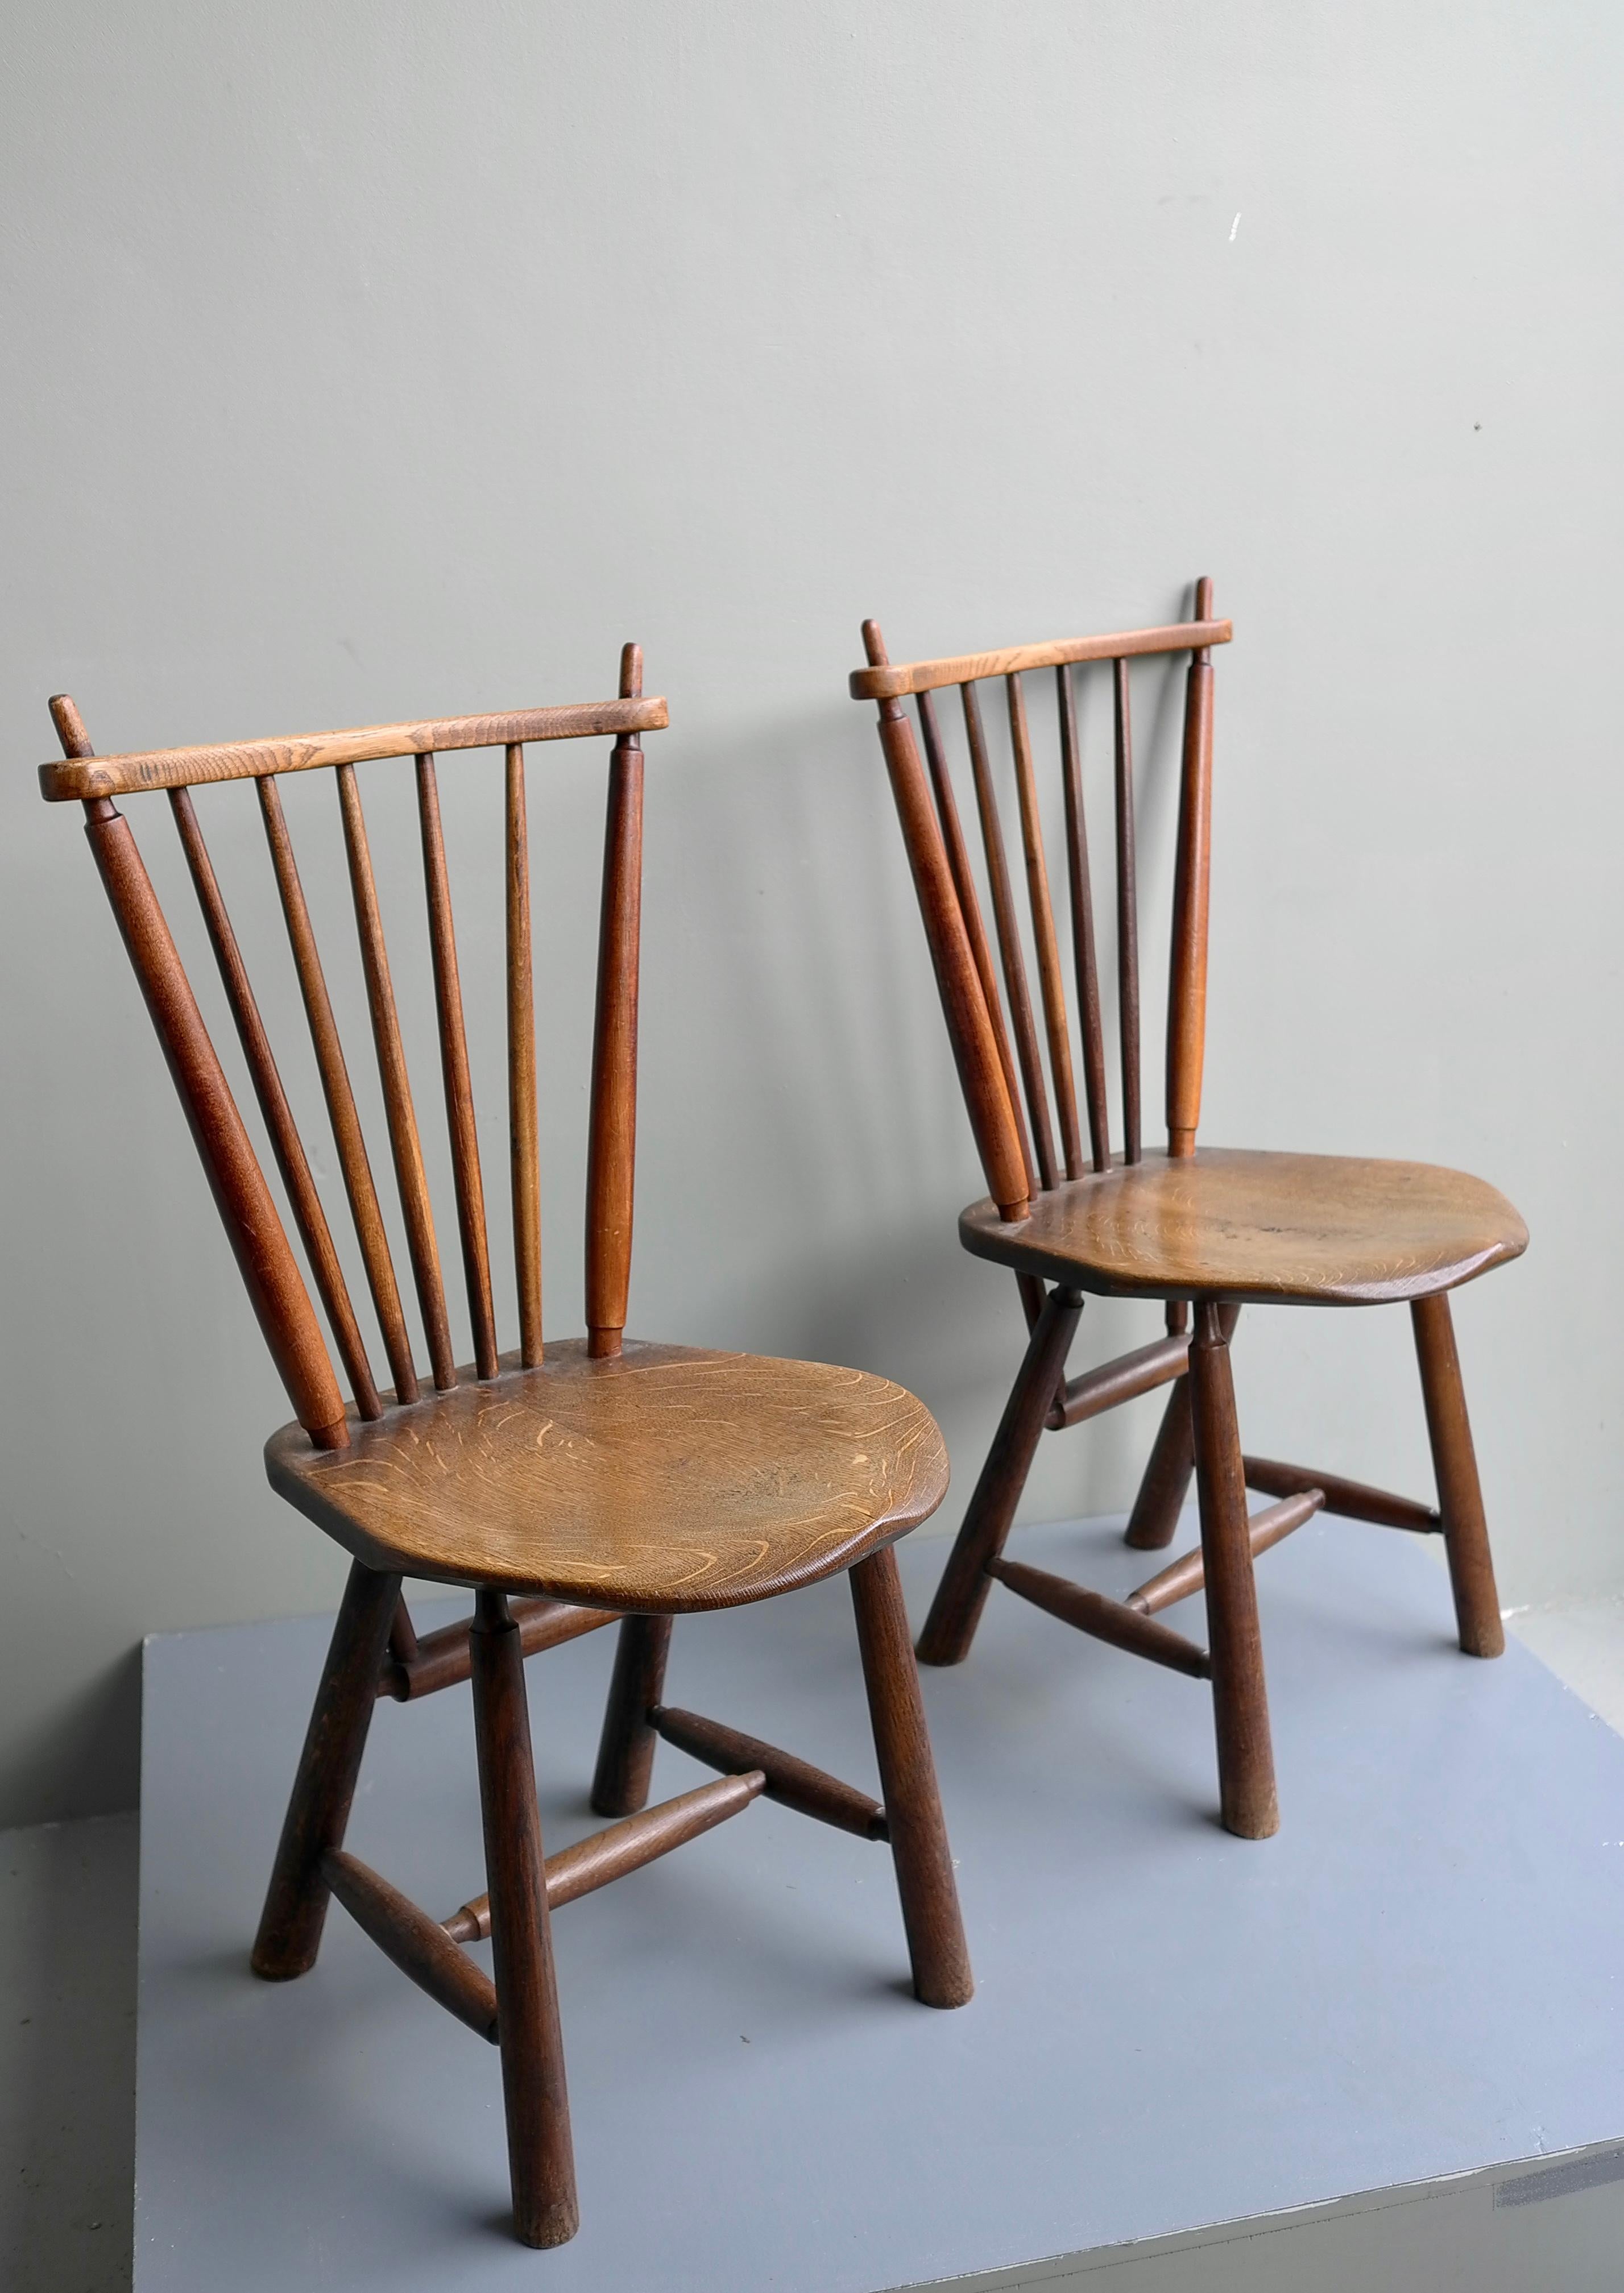 Pair of organic Mid-Century Modern solid oak side chairs, 1960's.